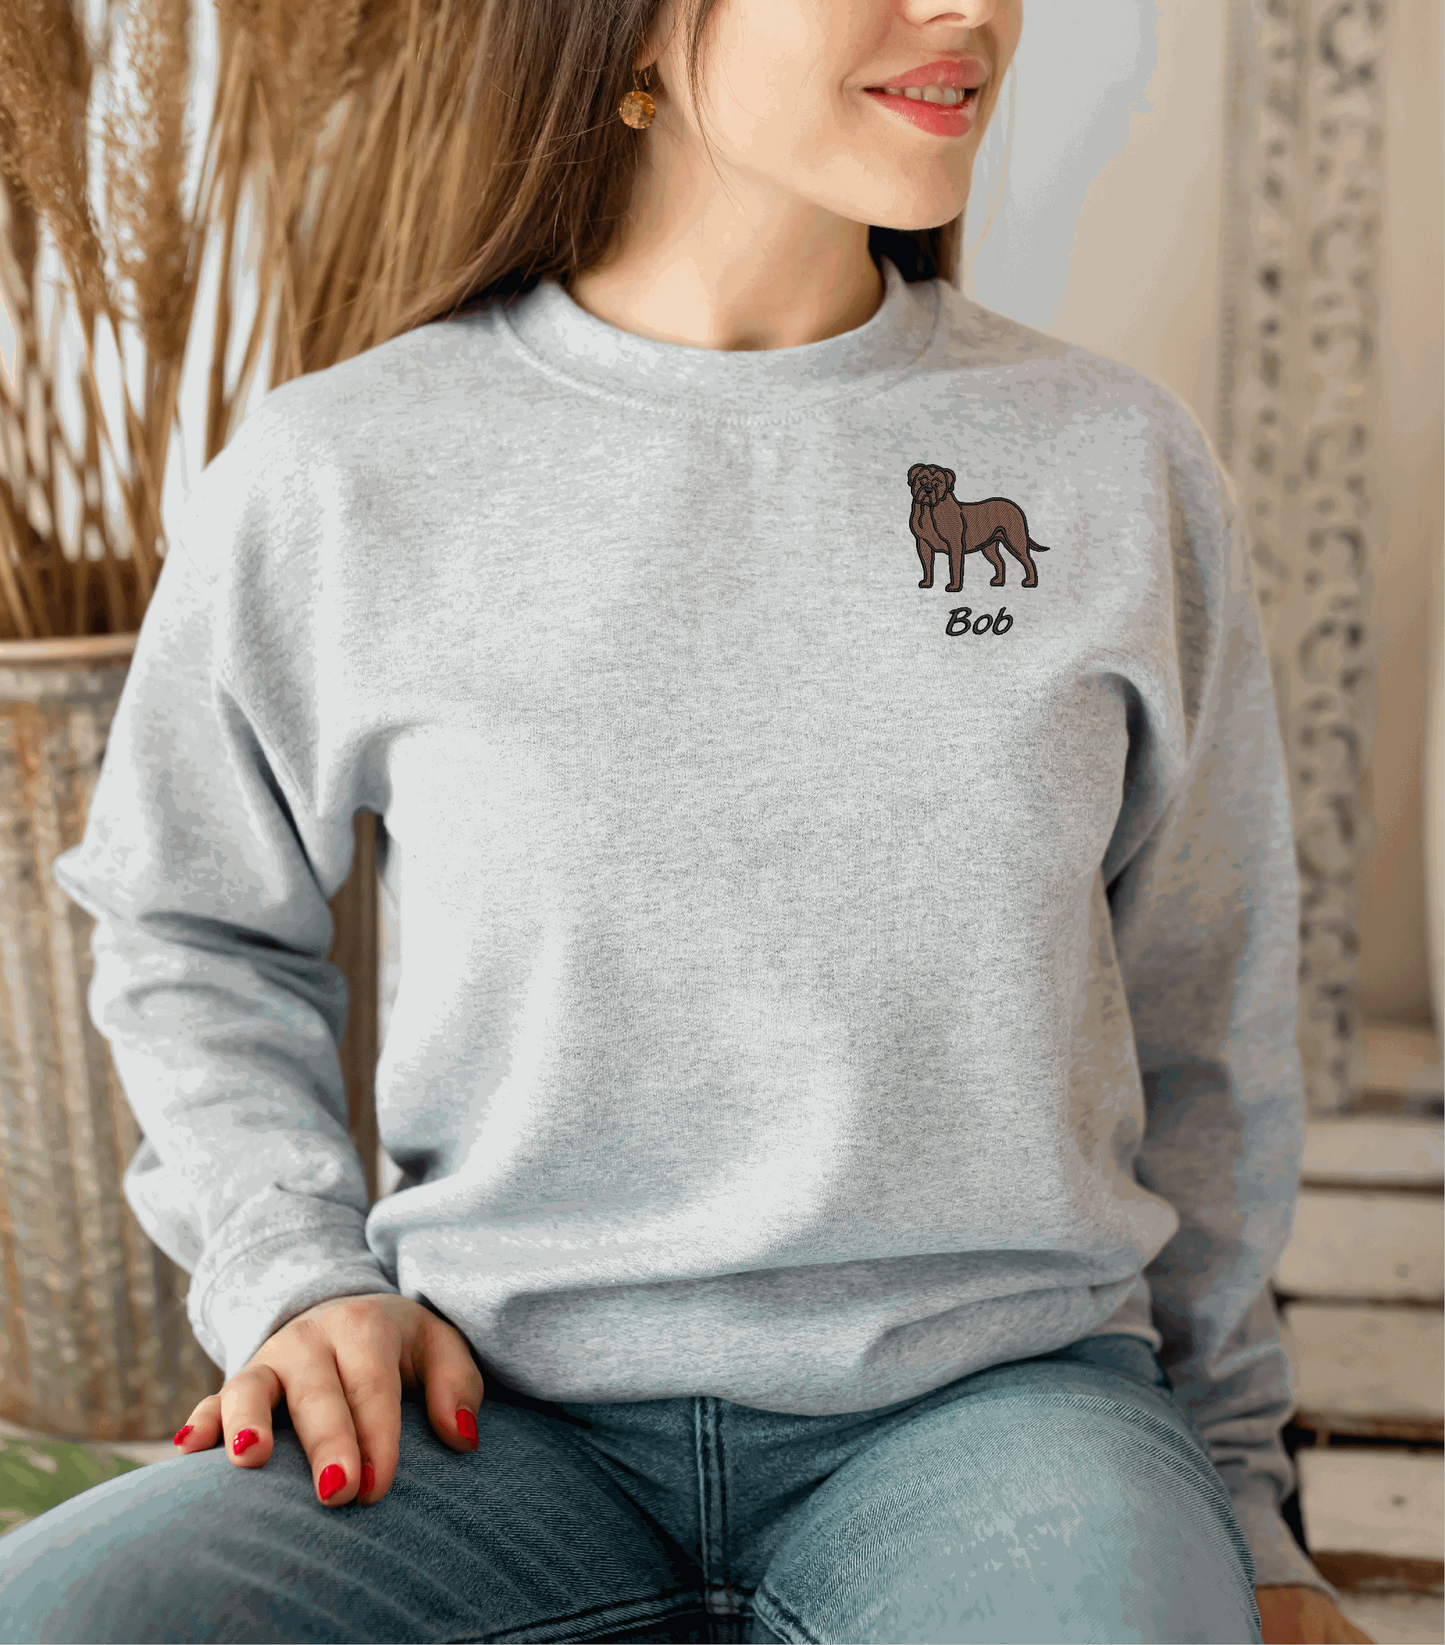 a woman sitting on a chair wearing a grey sweater with a dog embroidered on the